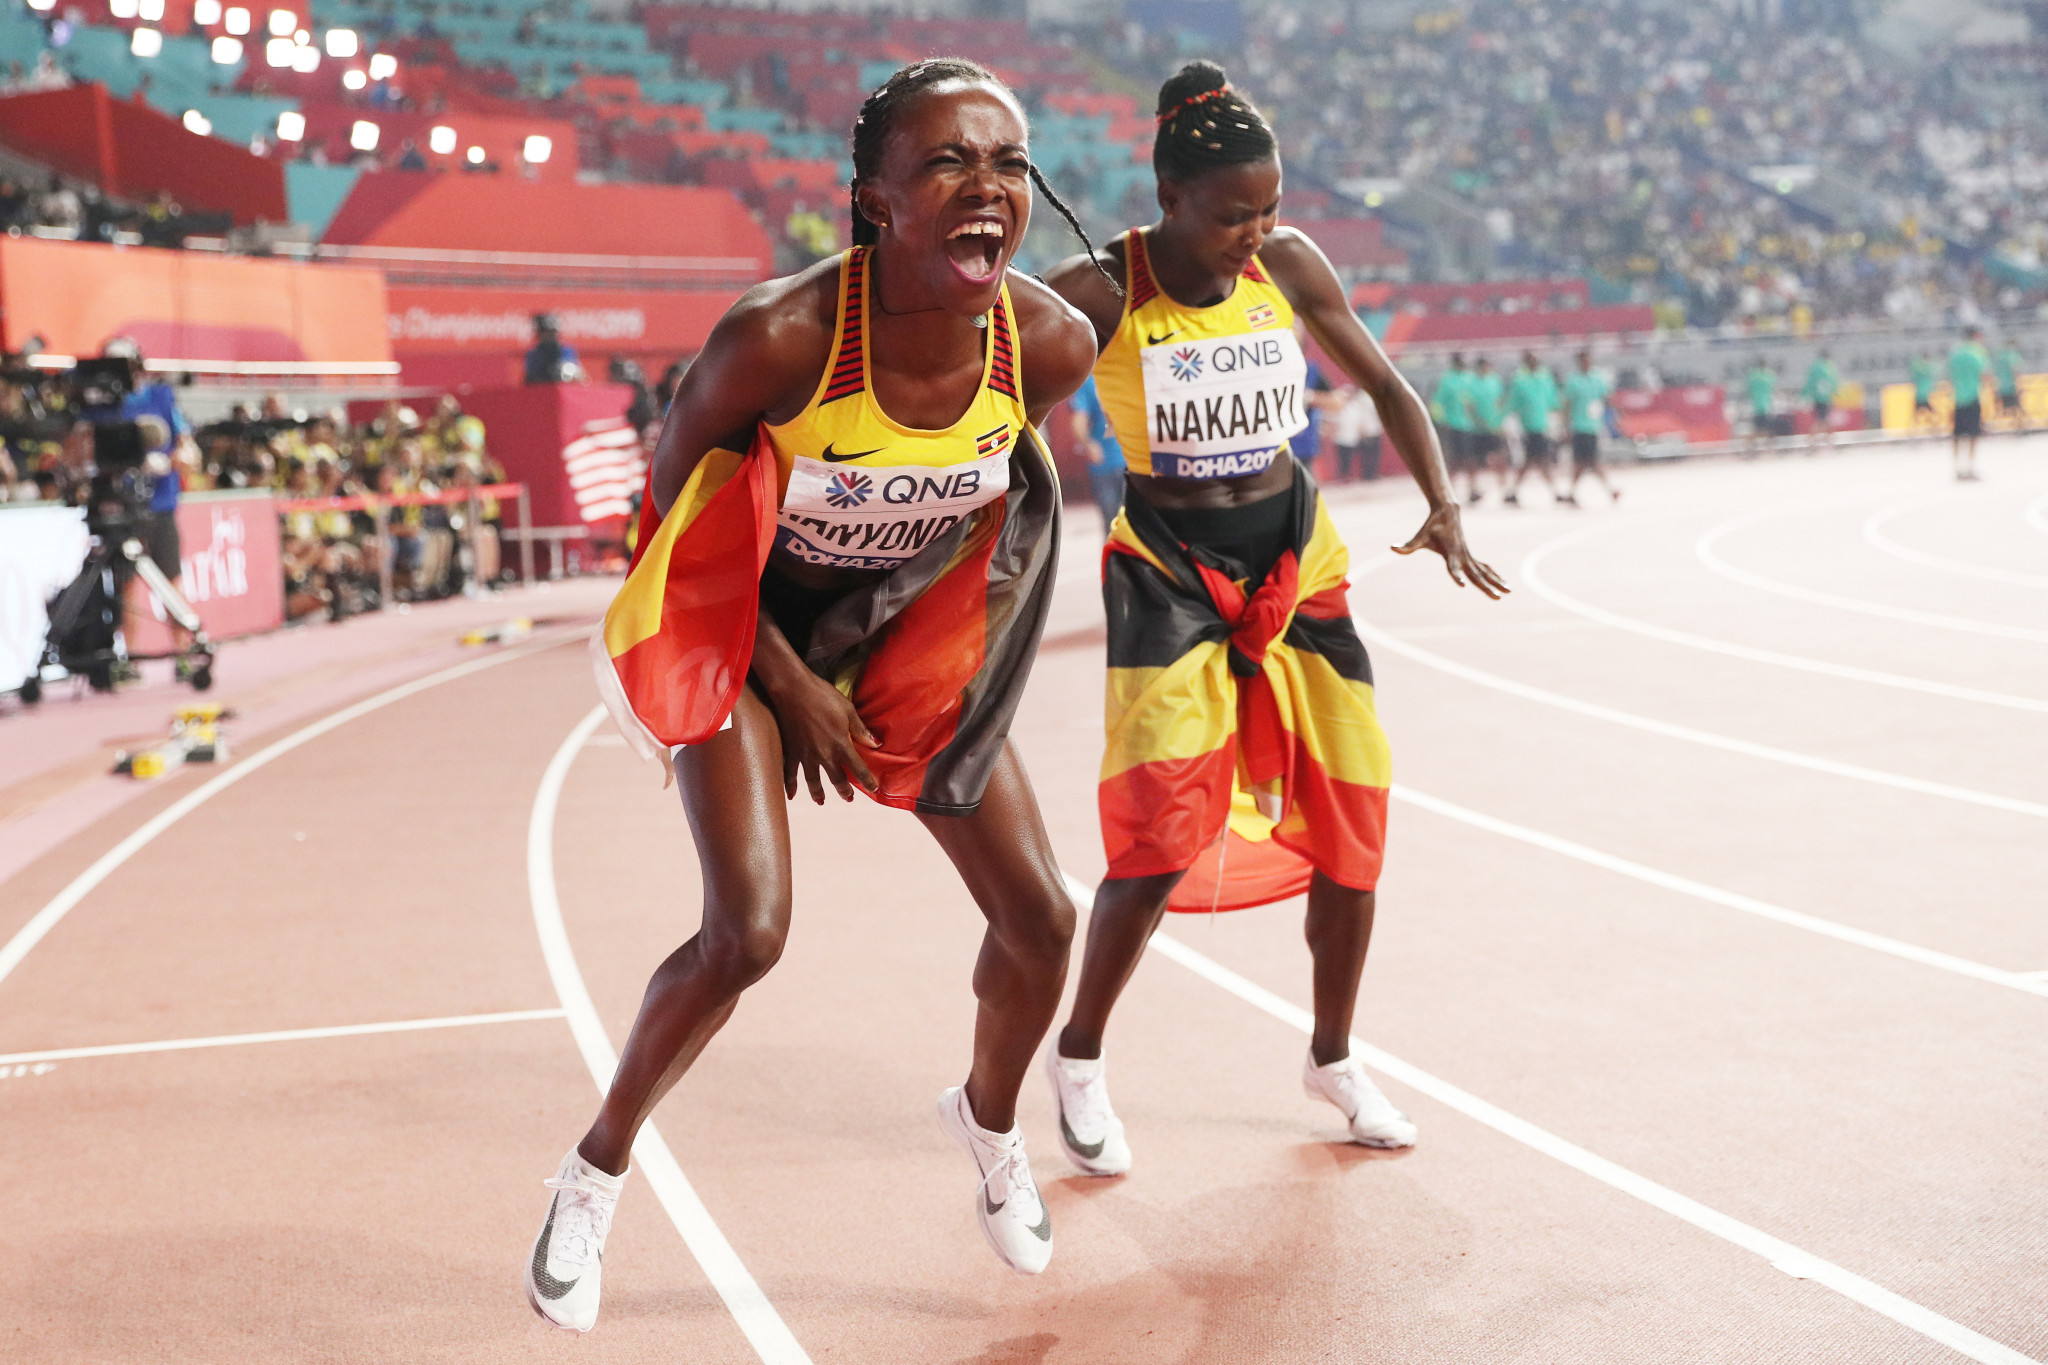 Easily the most joyous celebration of the night came after Uganda's Halima Nakaayi had unexpectedly won the women's 800m ©Getty Images